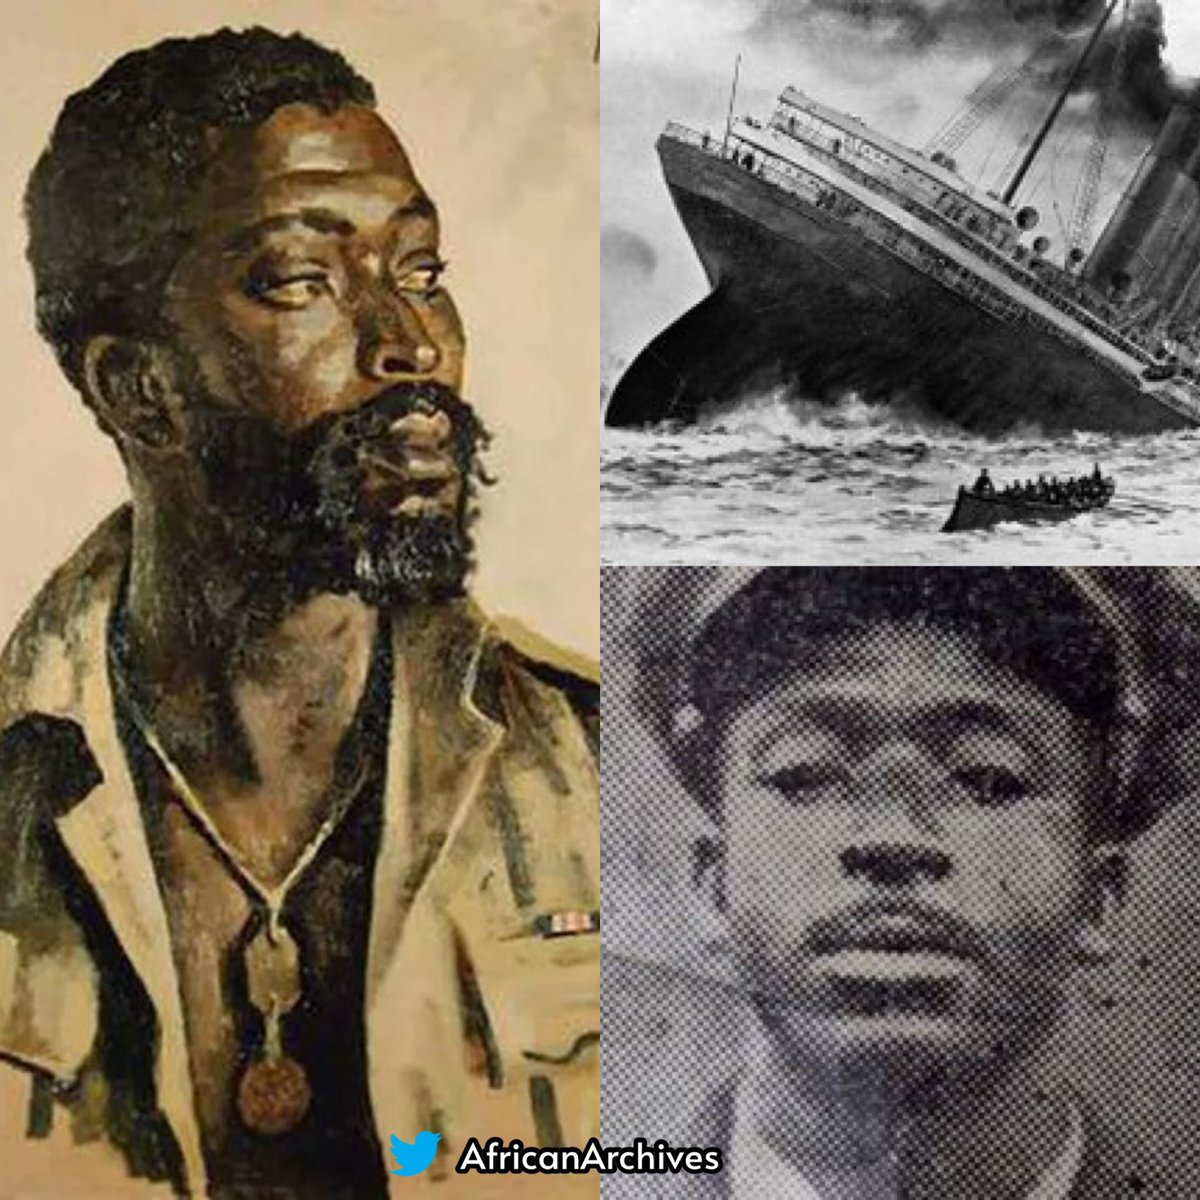 Job Maseko, a WW2 hero, sank a NAZI ship with a bomb made from a tin can with condensed milk. He was denied the highest military decoration, due to his race. A THREAD!